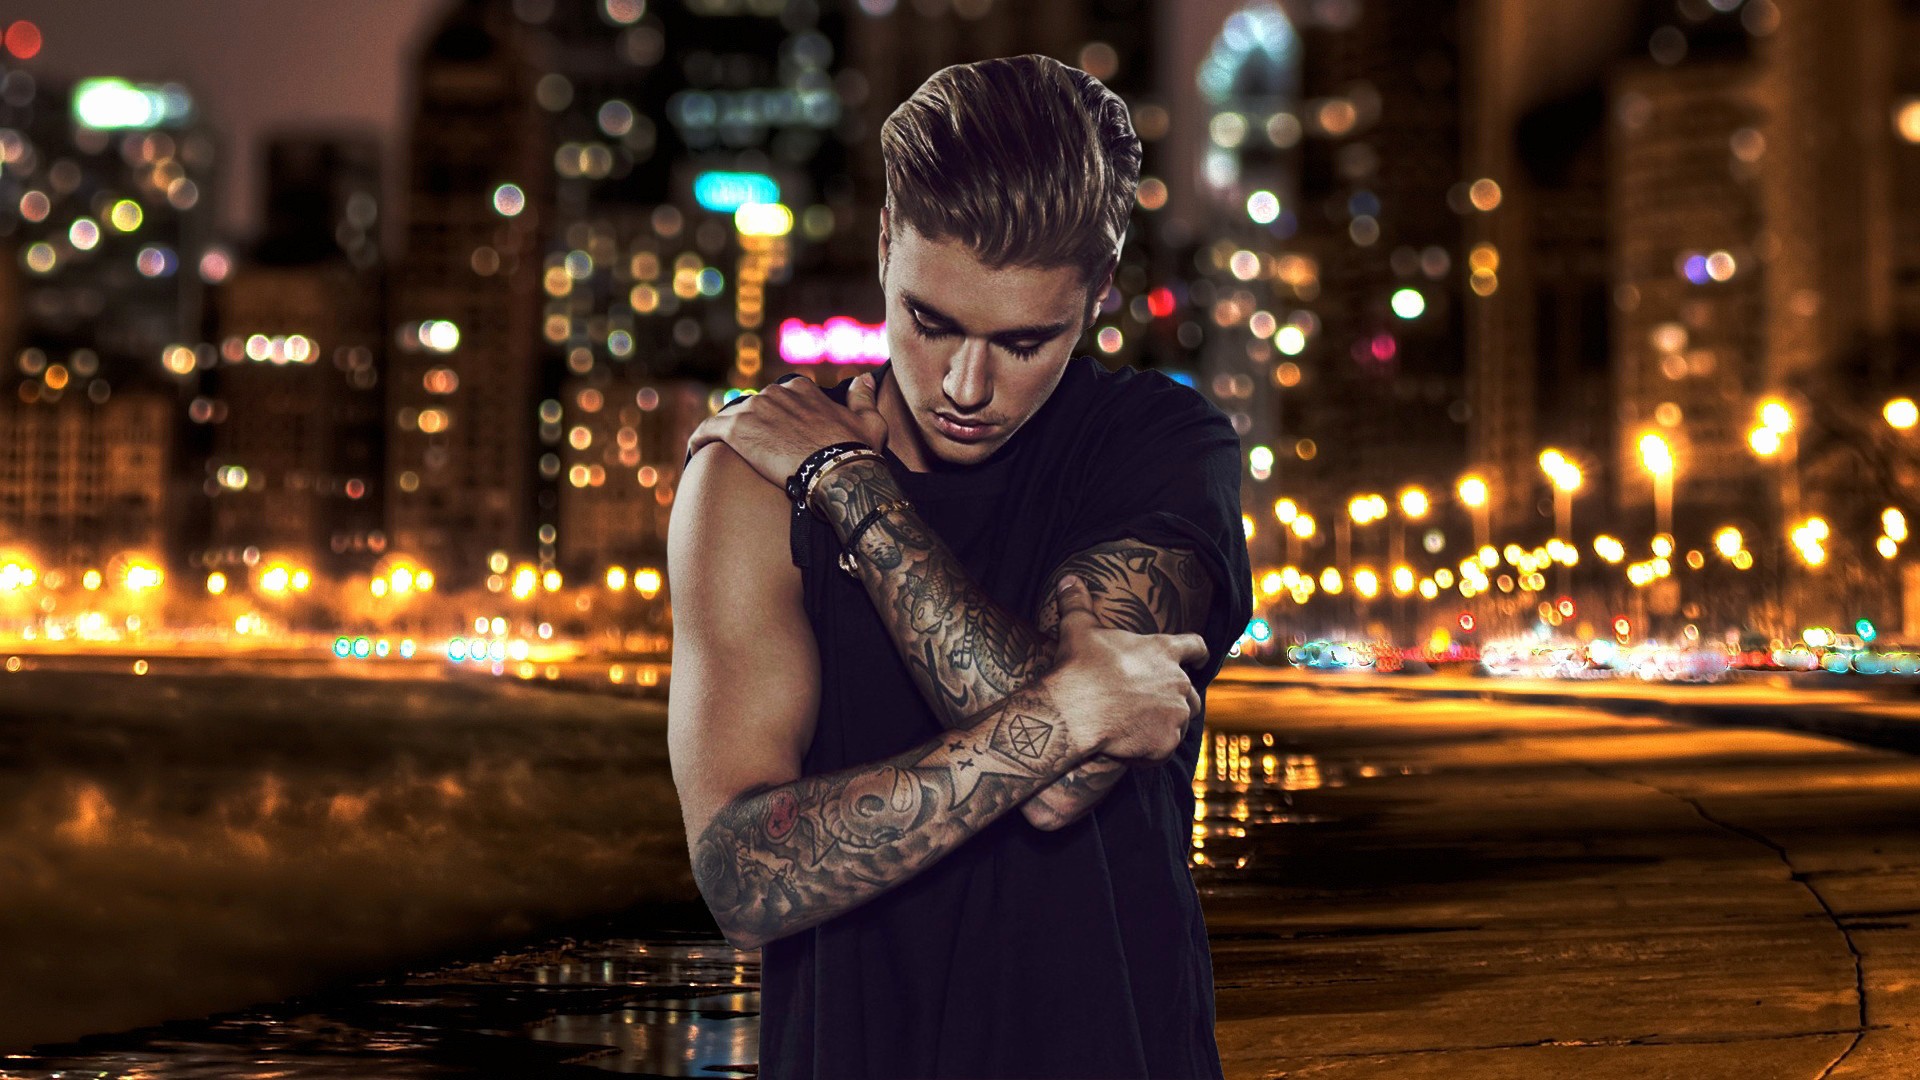 Justin Bieber Wallpaper Lovely Justin Bieber Wallpaper HD 2018 The Best 67 Images In 2018 best picture